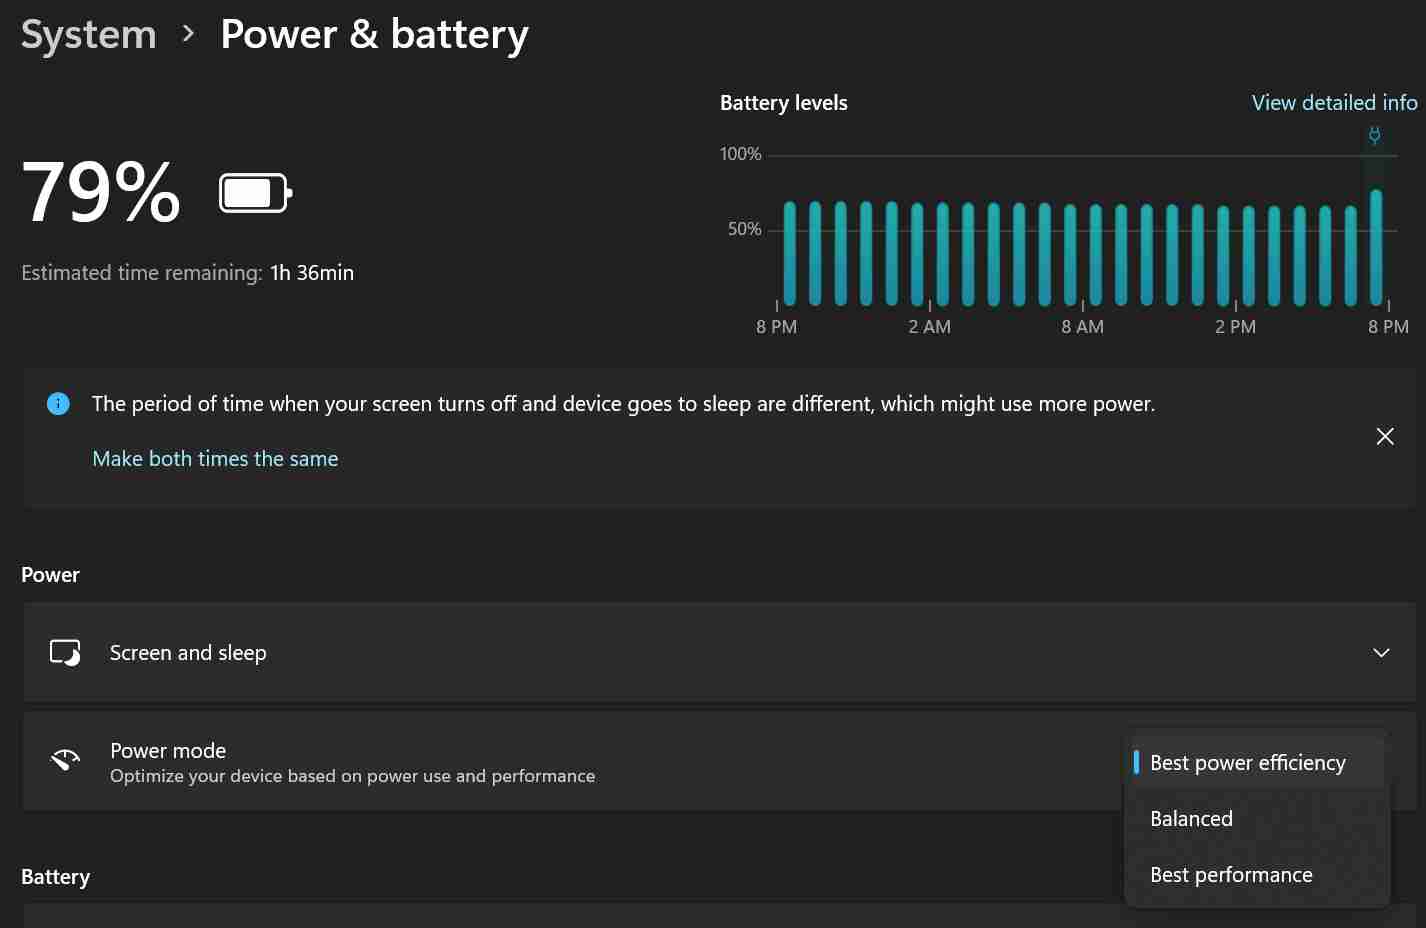 Improve your laptop's battery life easily